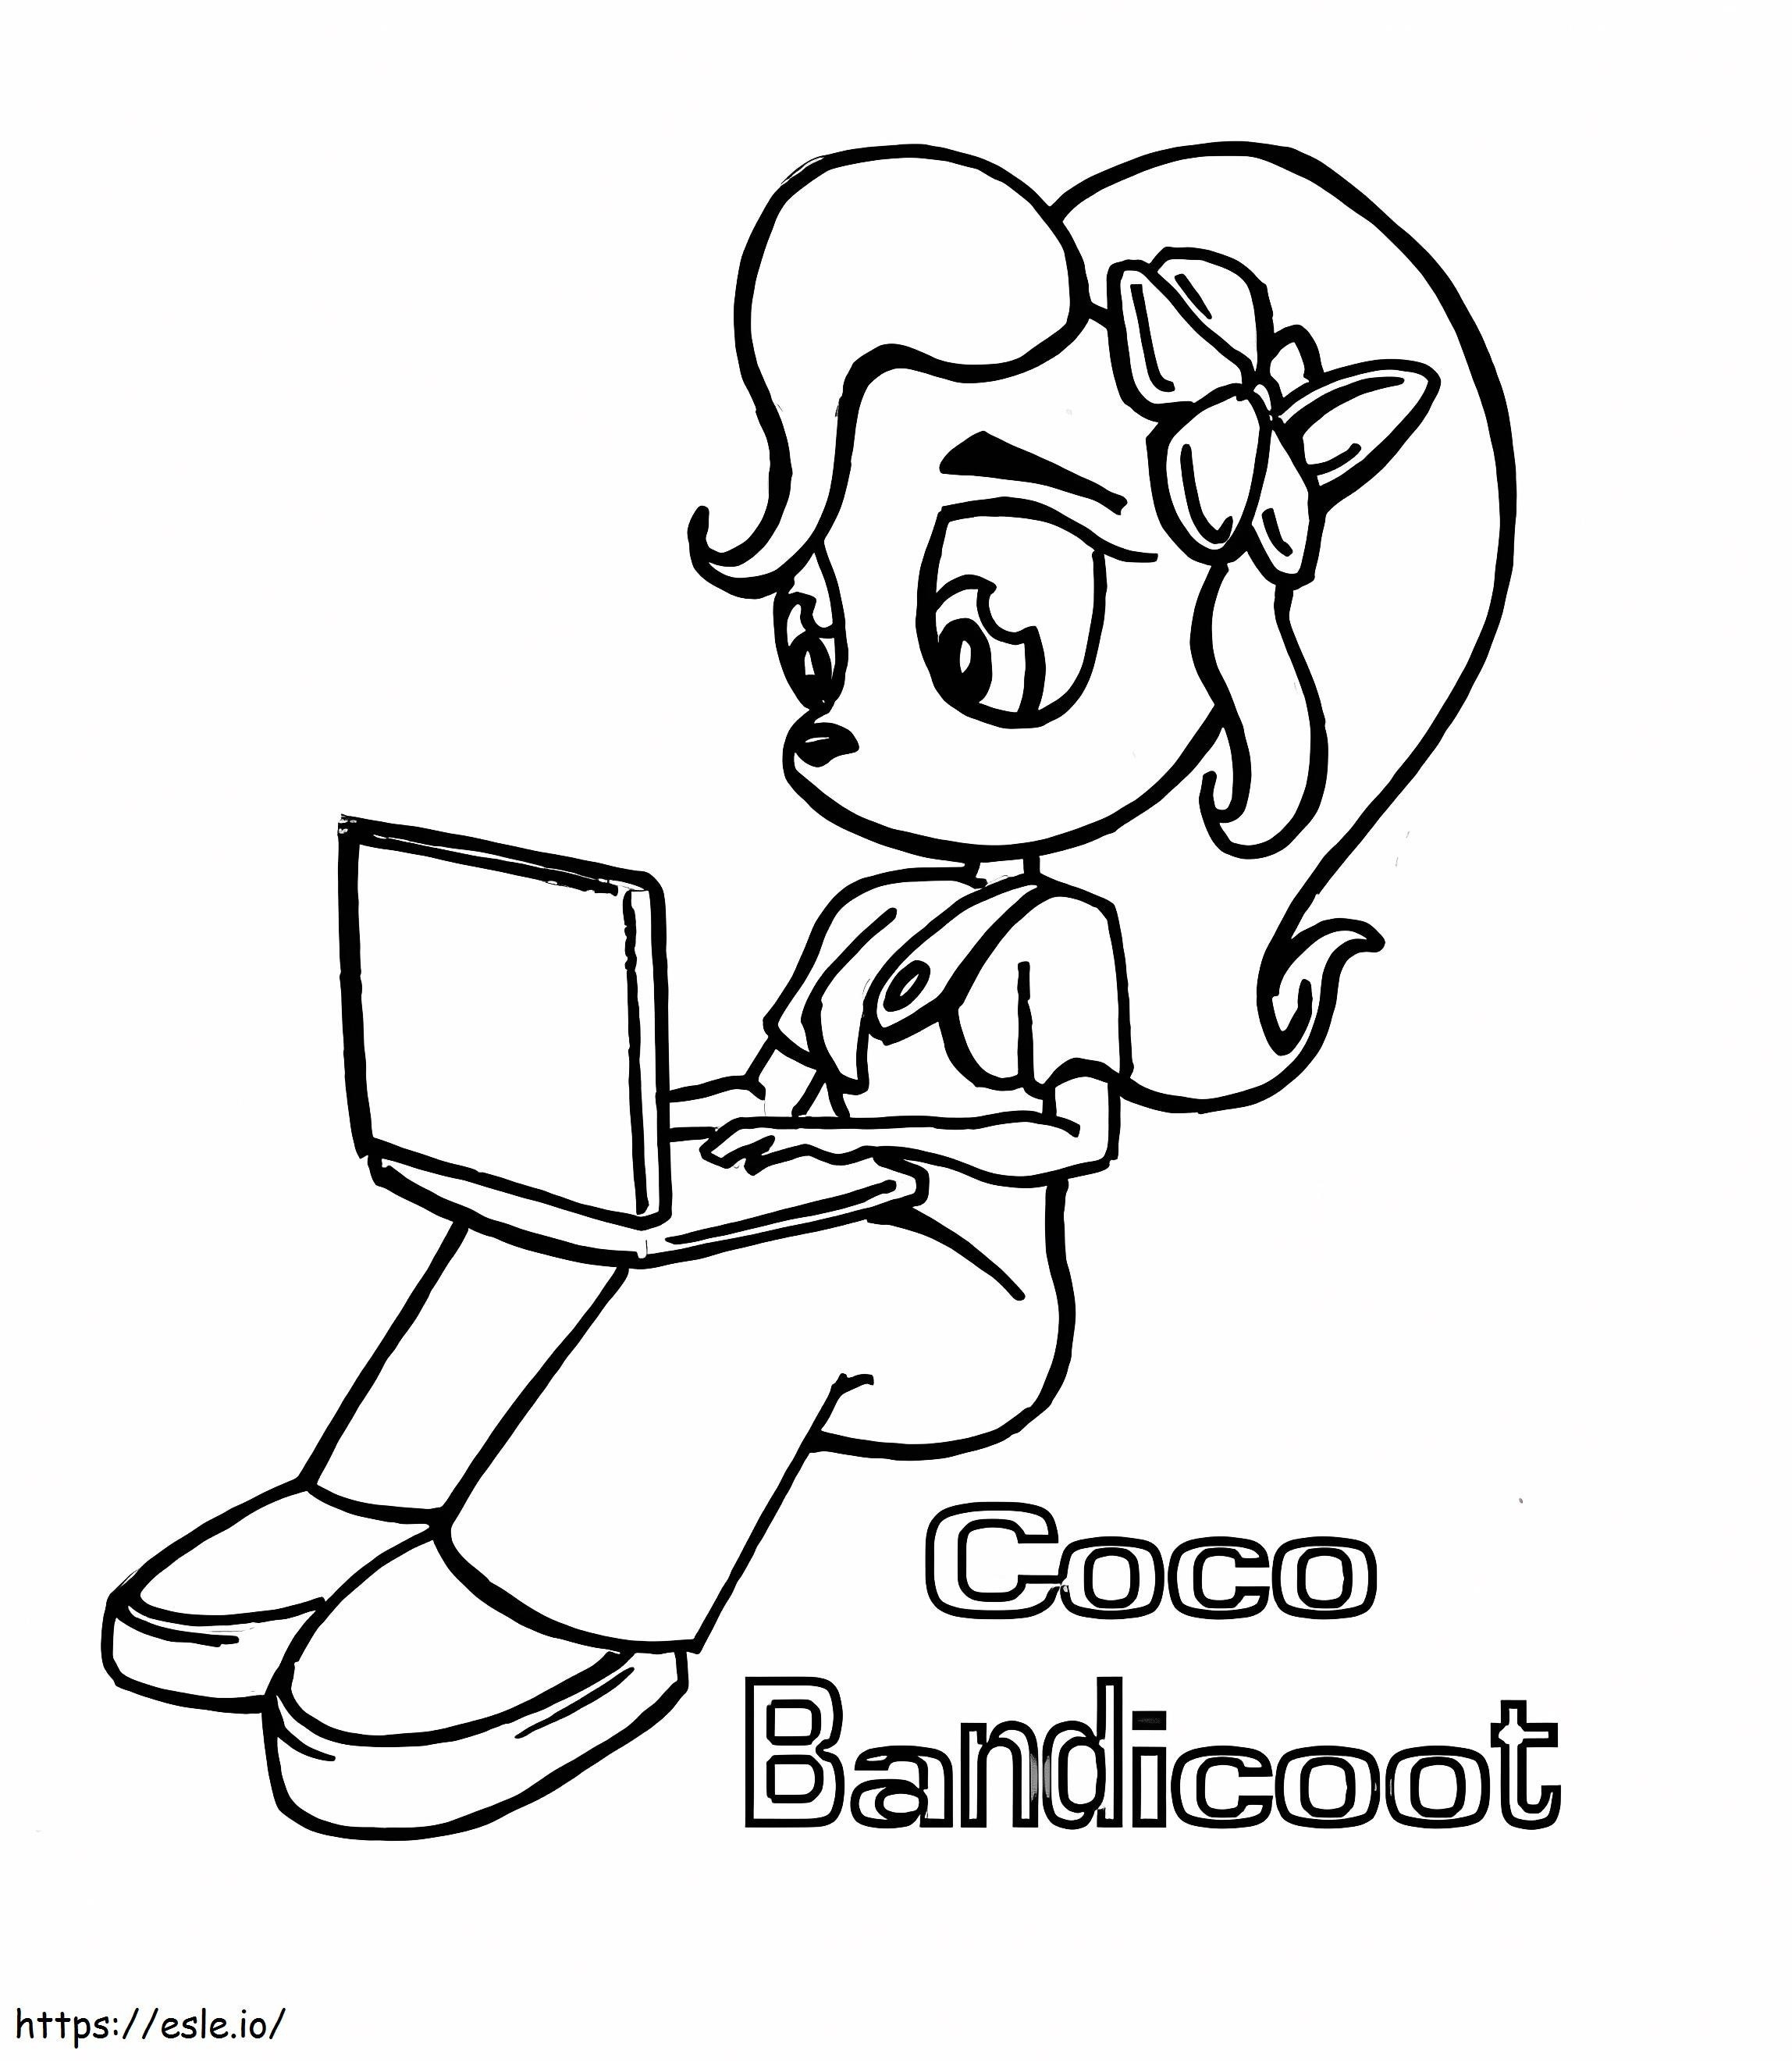 Lovely Coco Bandicoot coloring page